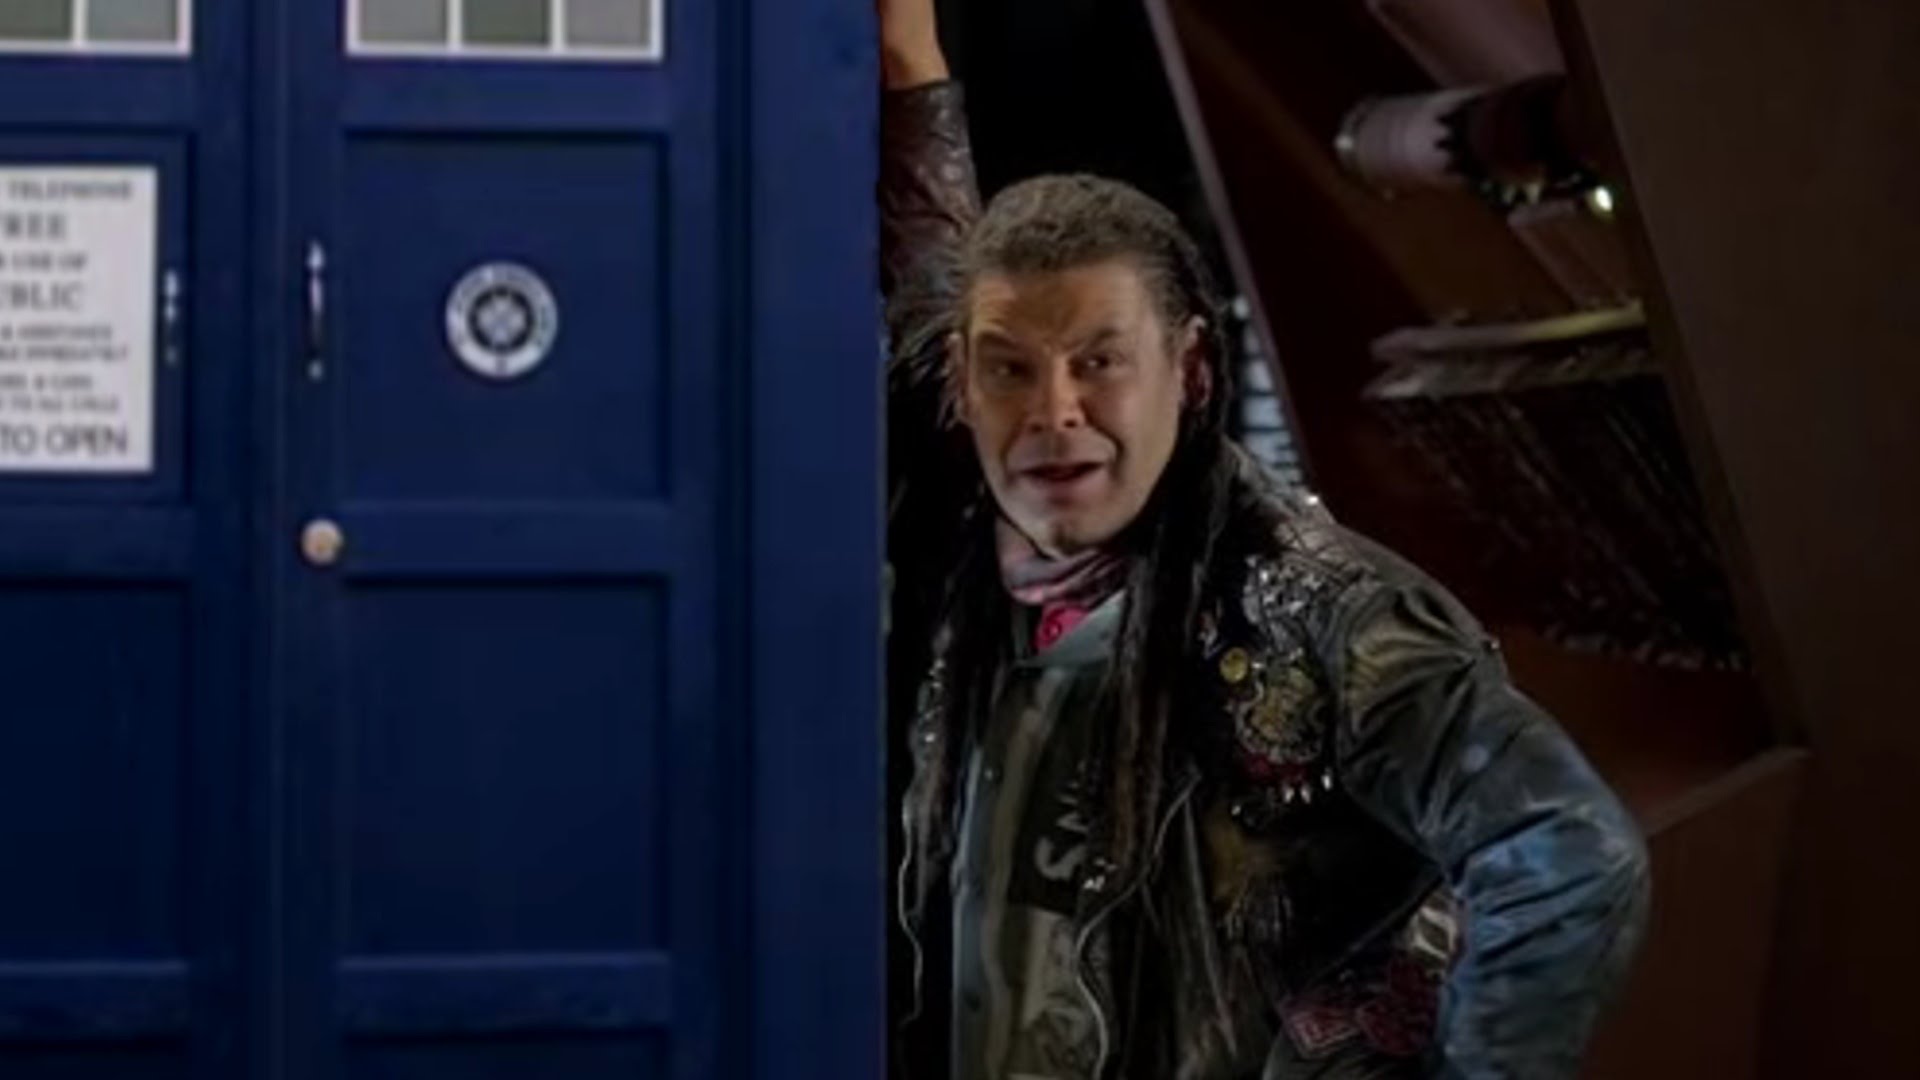 Doctor Who Red Dwarf crossover anyone